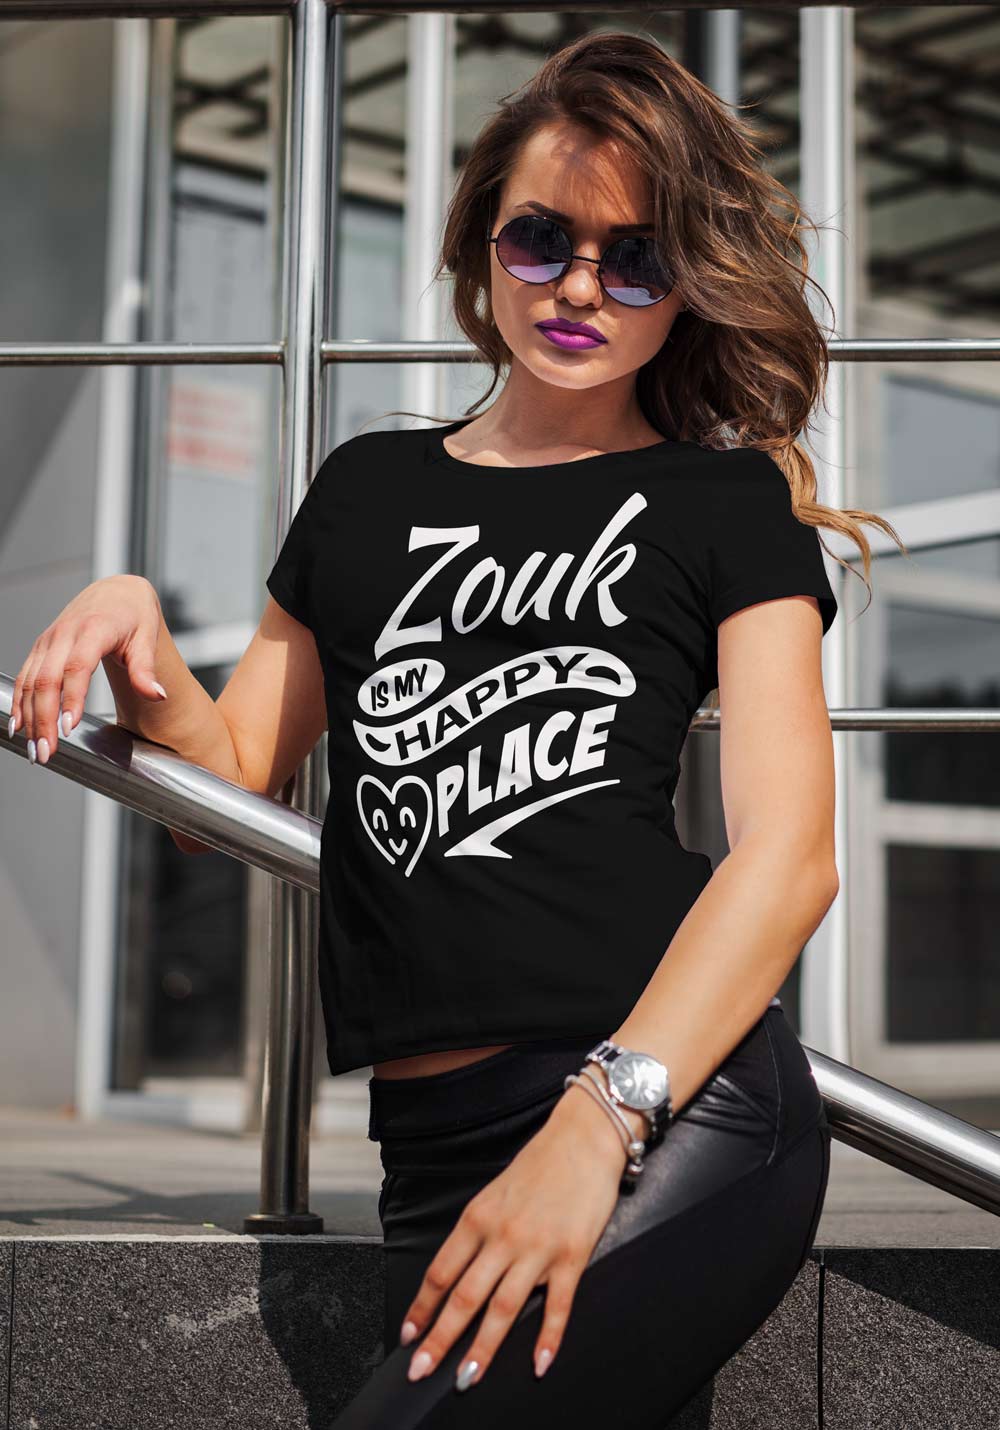 Woman wearing Zouk T-shirt decorated with unique “Zouk is my happy place” design (black crew neck style)